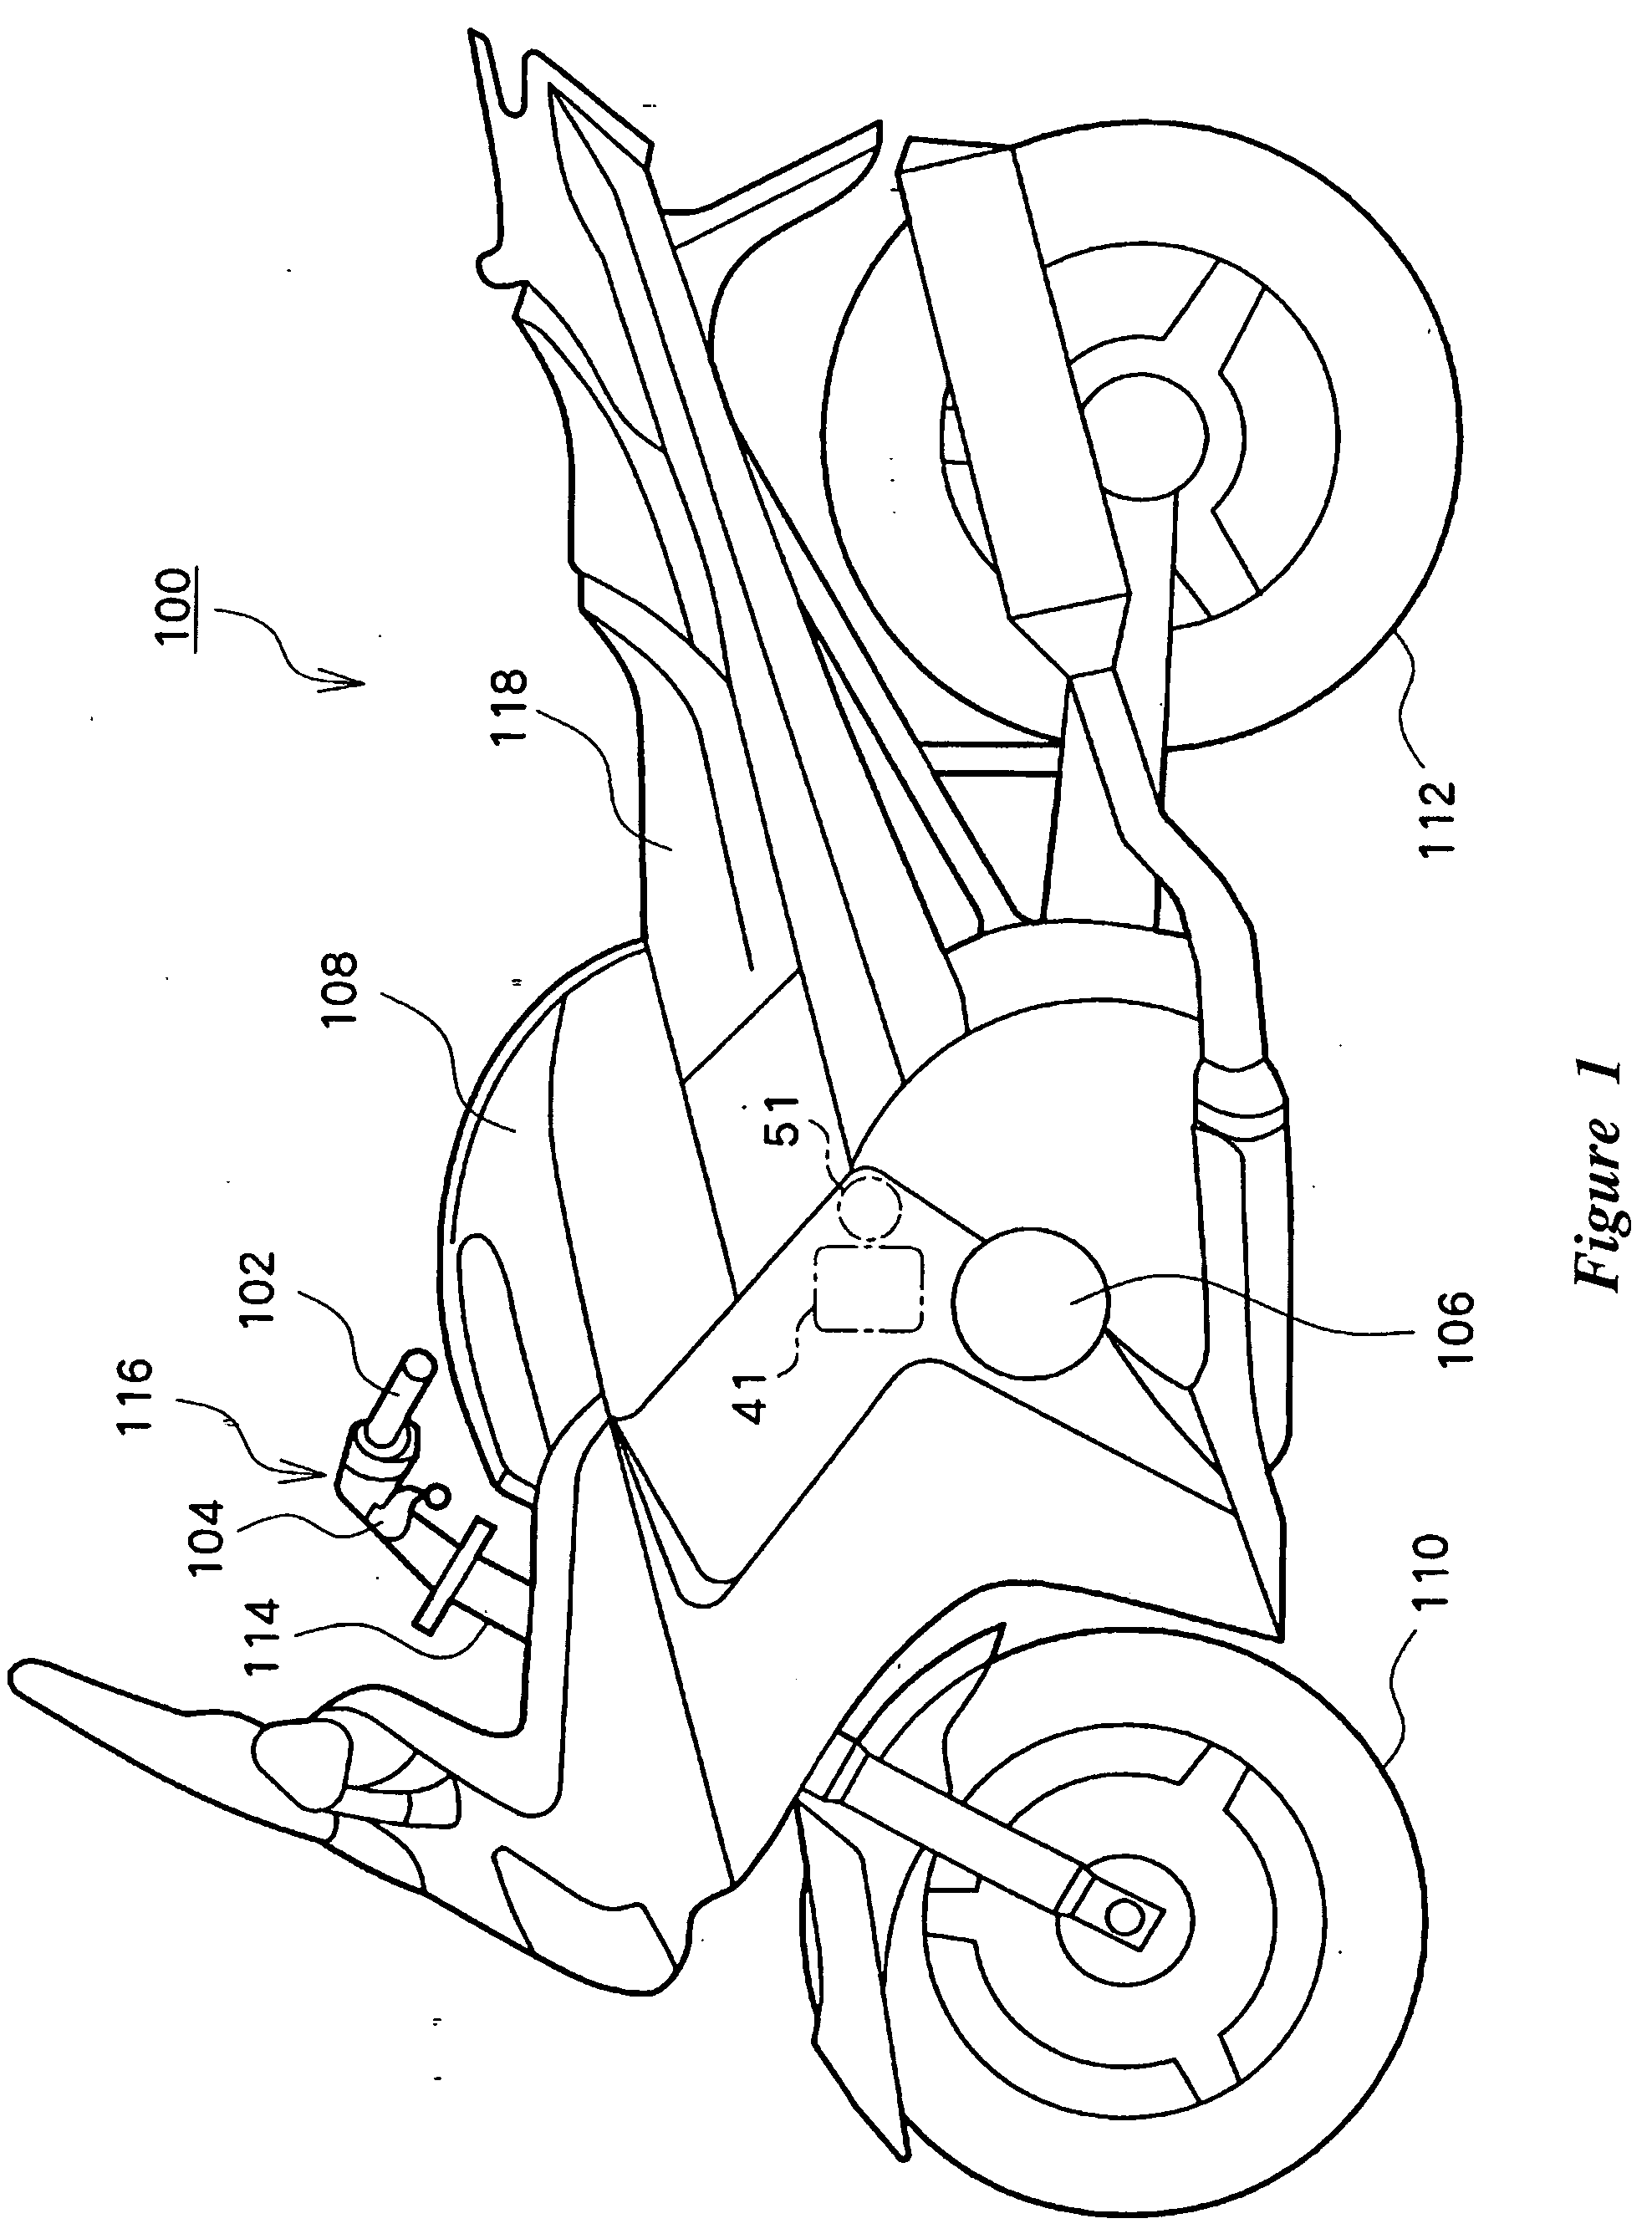 Apparatus and method for controlling transmission of straddle-type vehicle